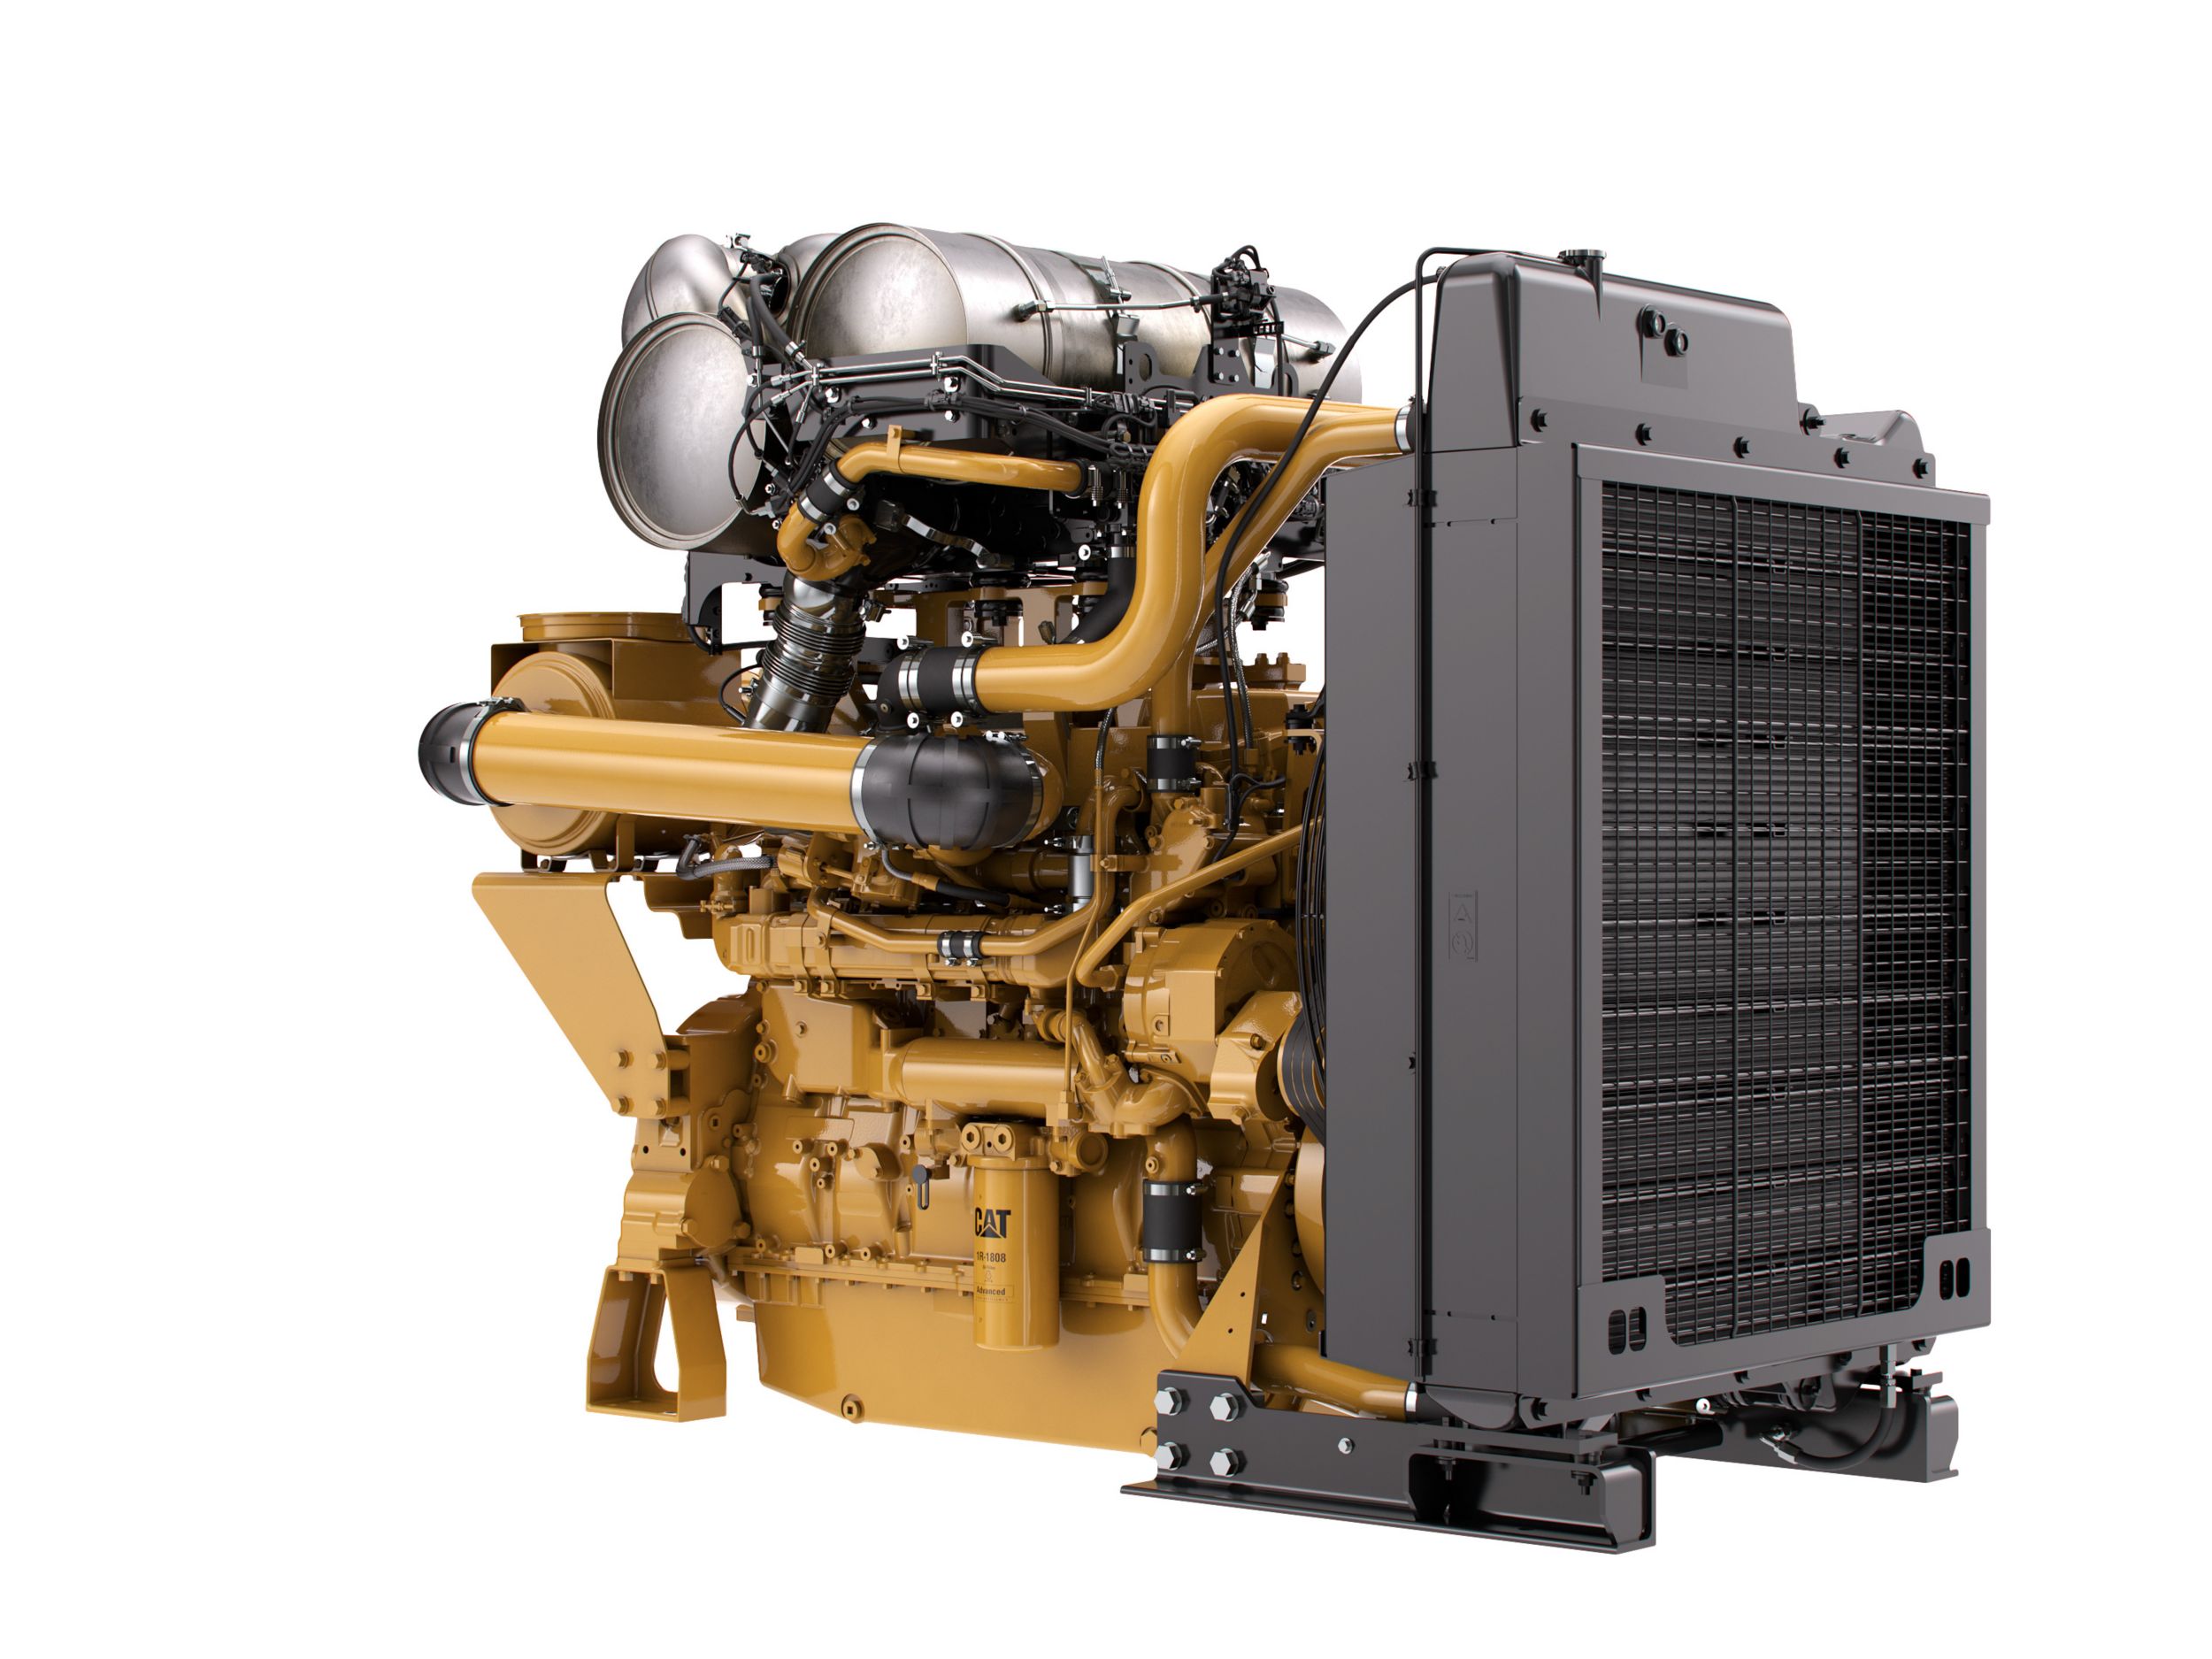 C15 Industrial Power Units - Highly Regulated>